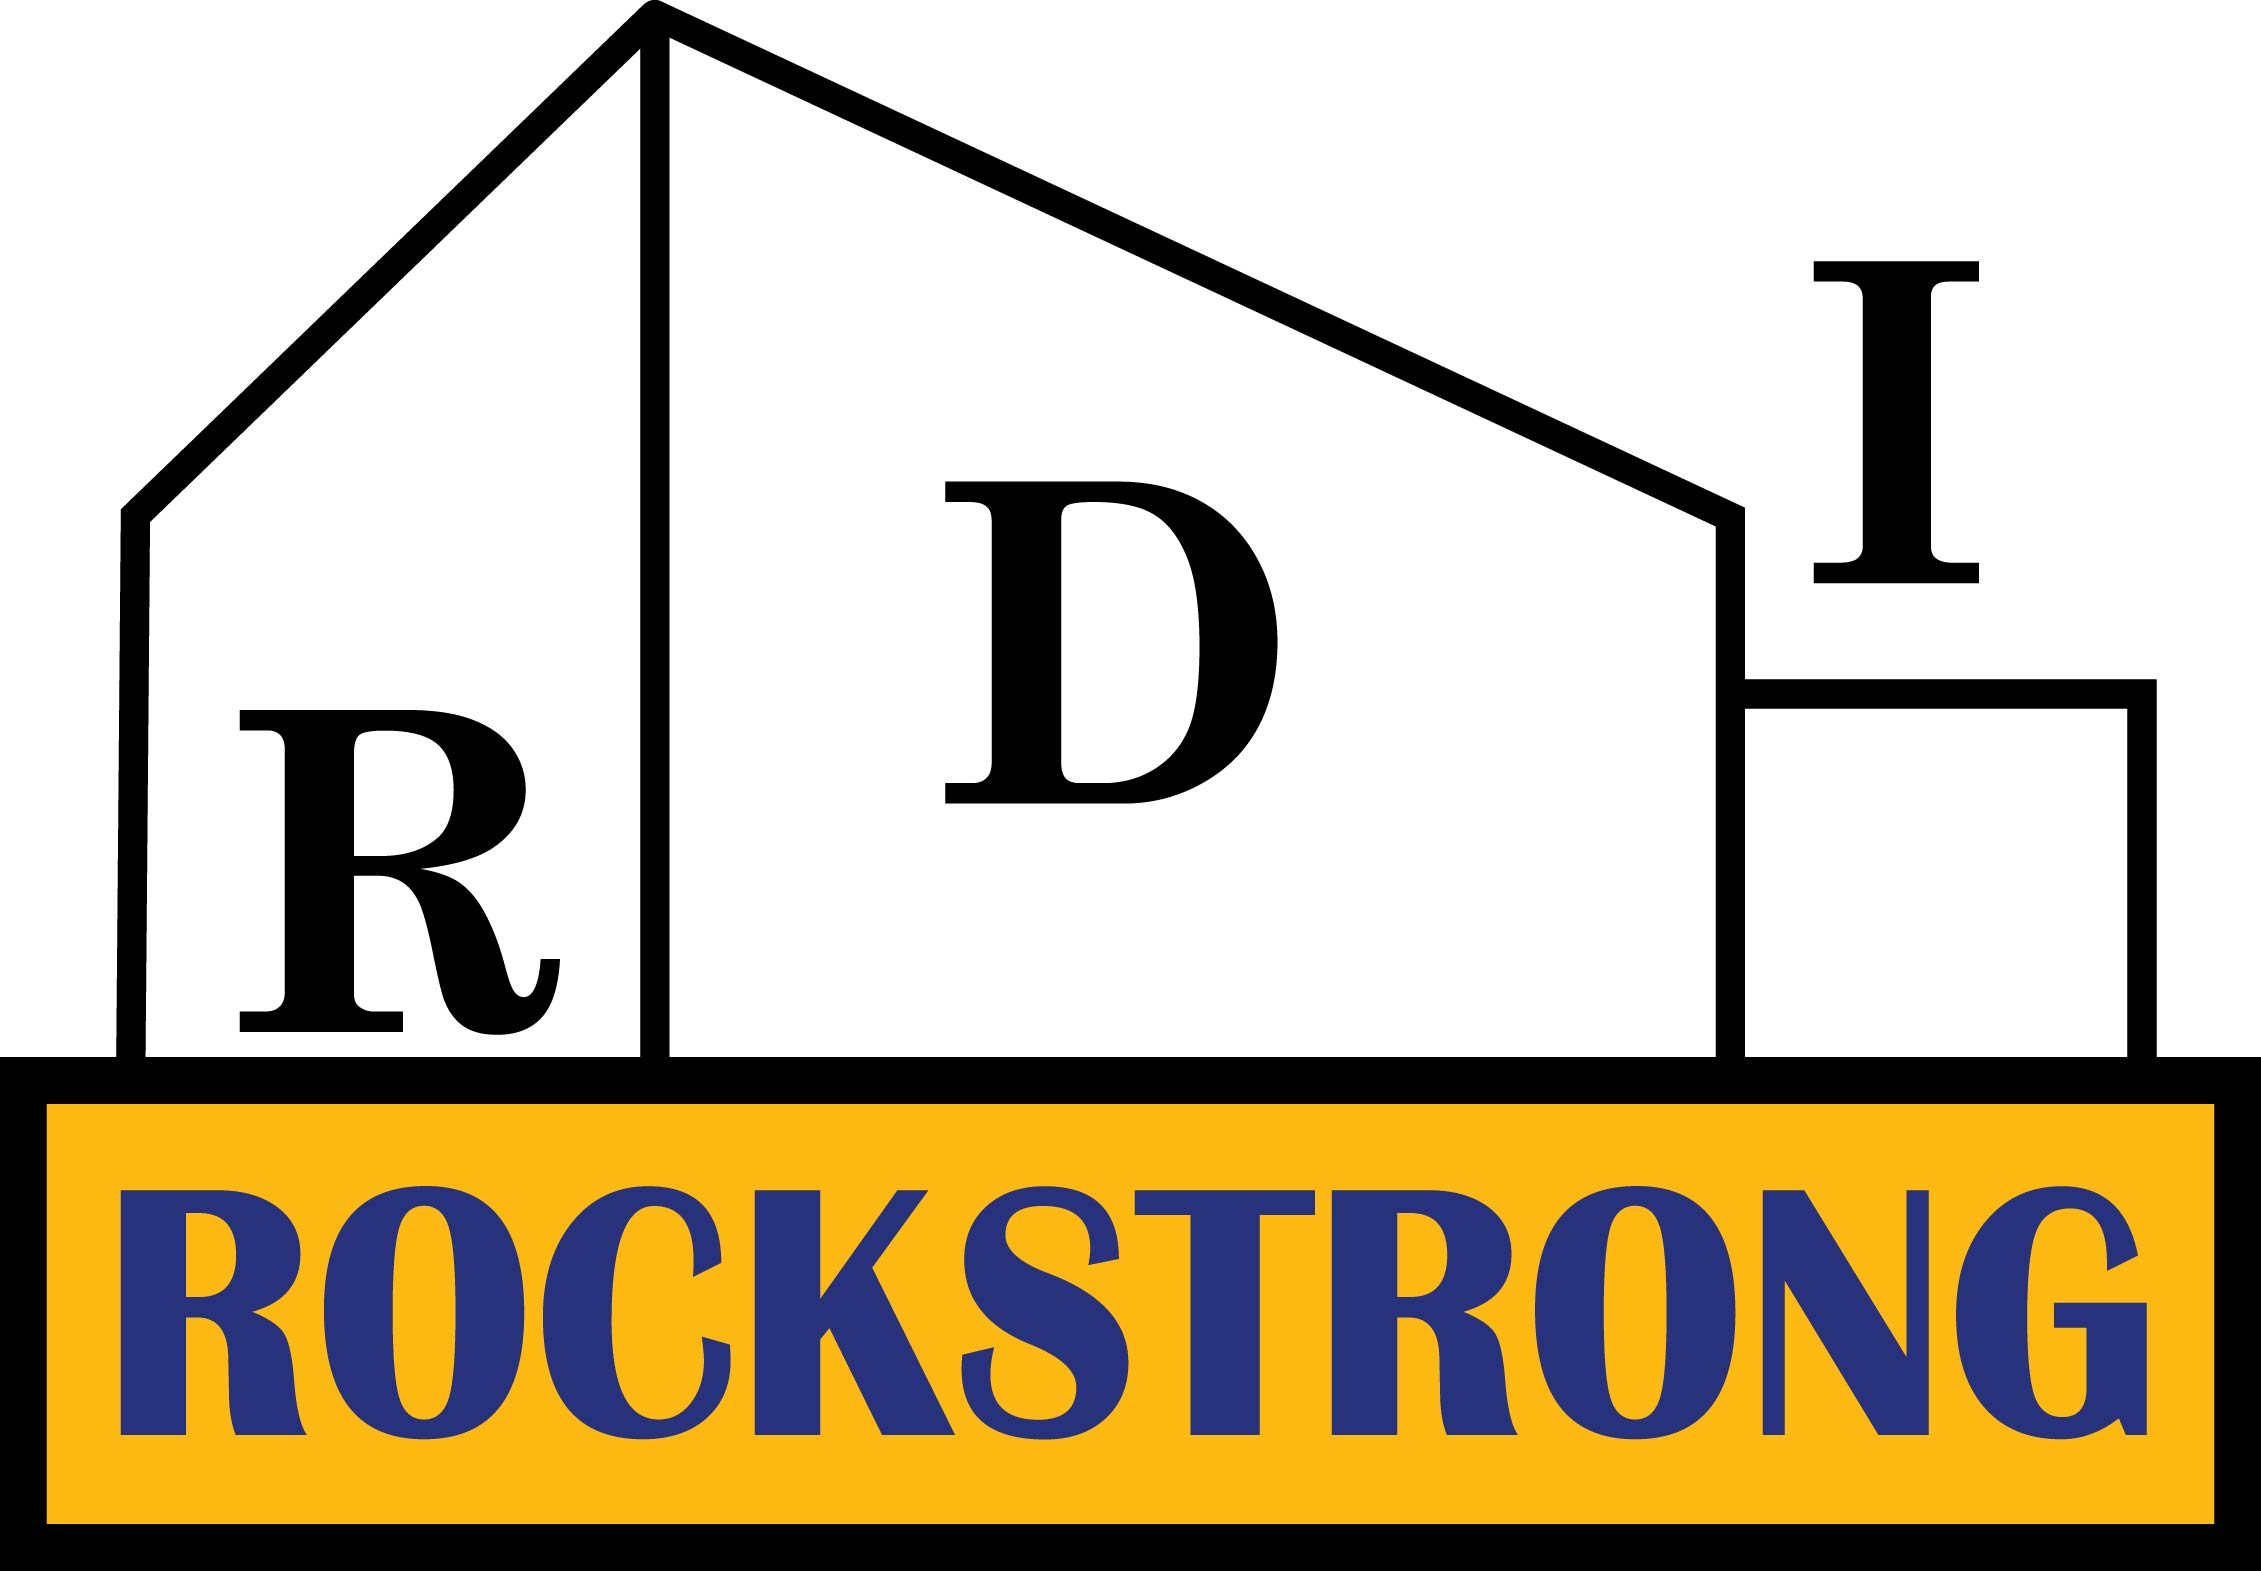 Contact Rockstrong General Contractor for Bathroom, Kitchen and Home Remodeling